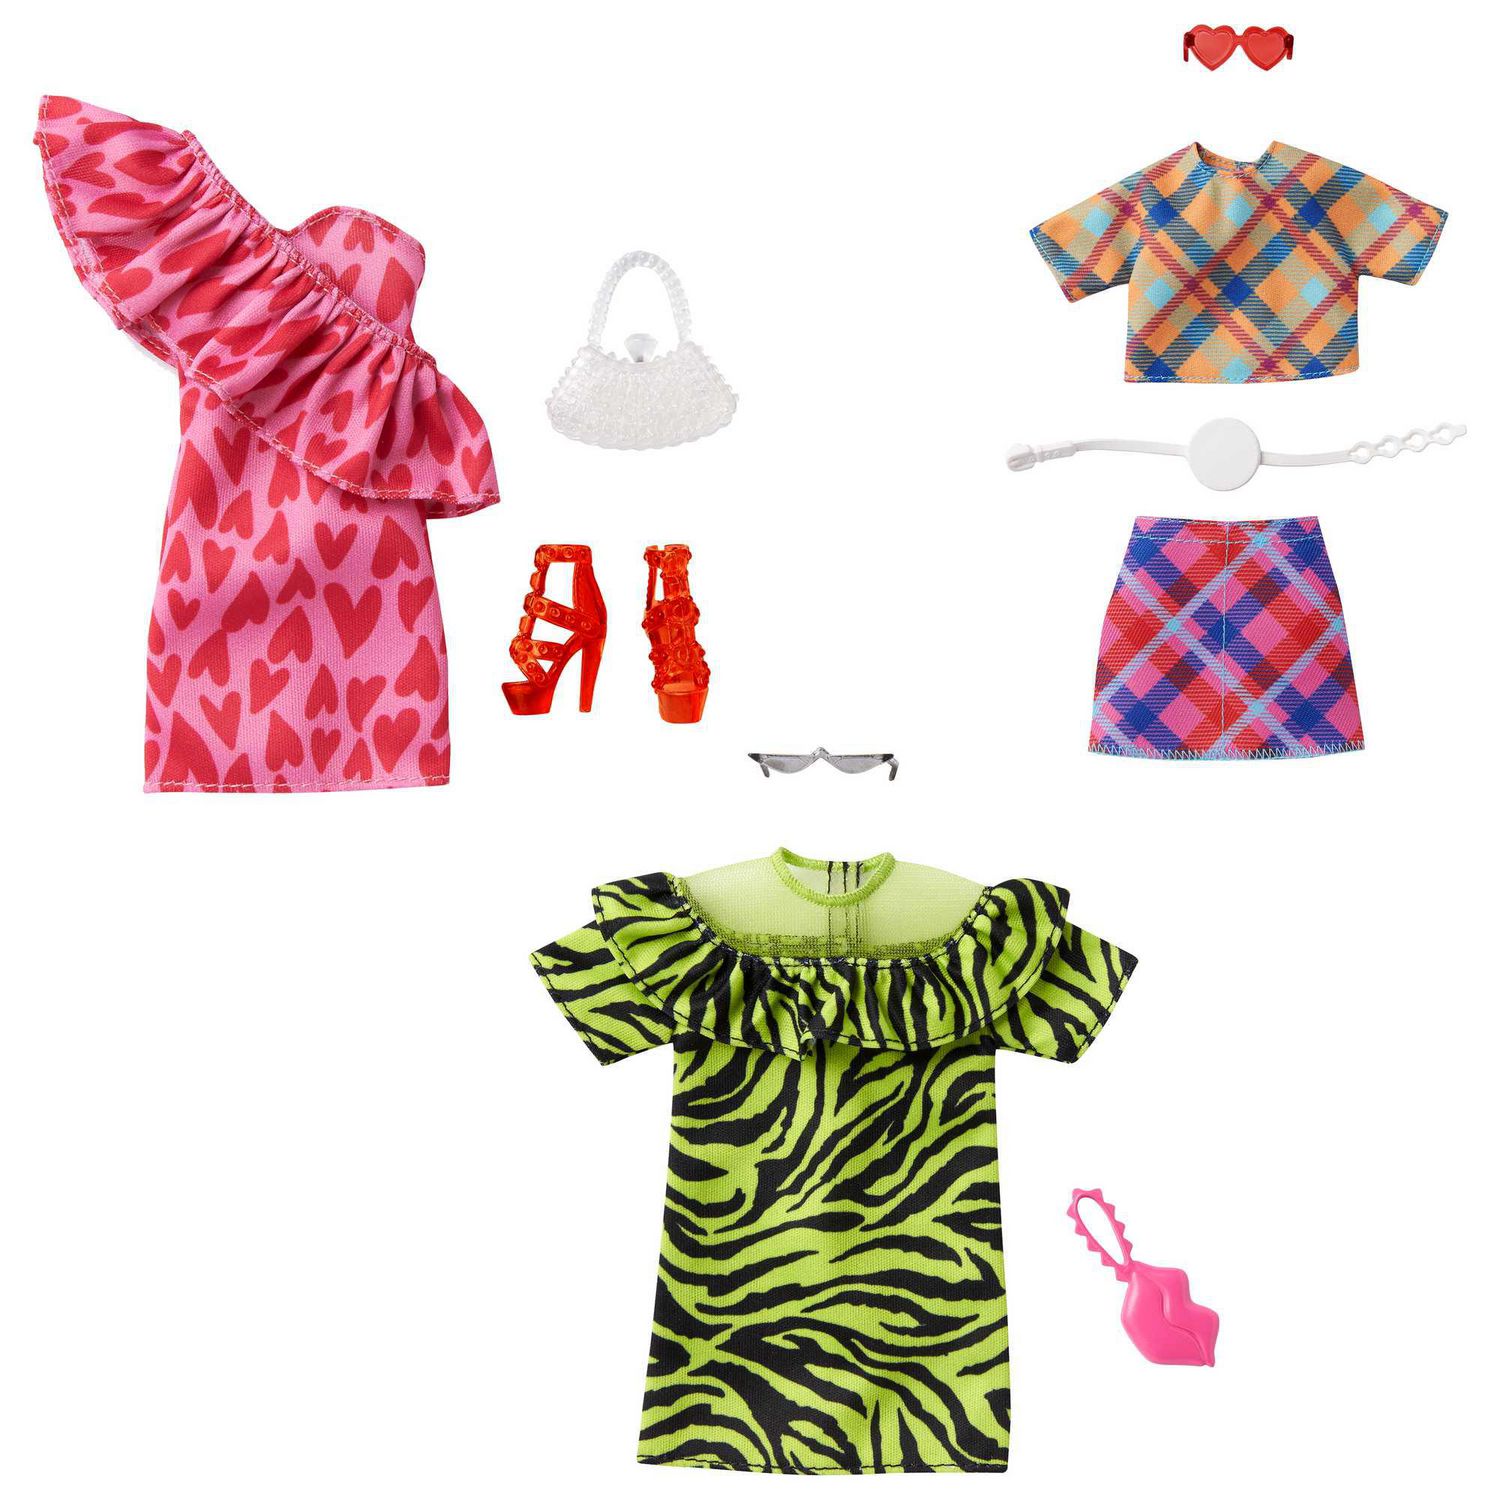 Barbie Clothes, Picnic-Themed Fashion and Accessory 2-Pack for Barbie Dolls